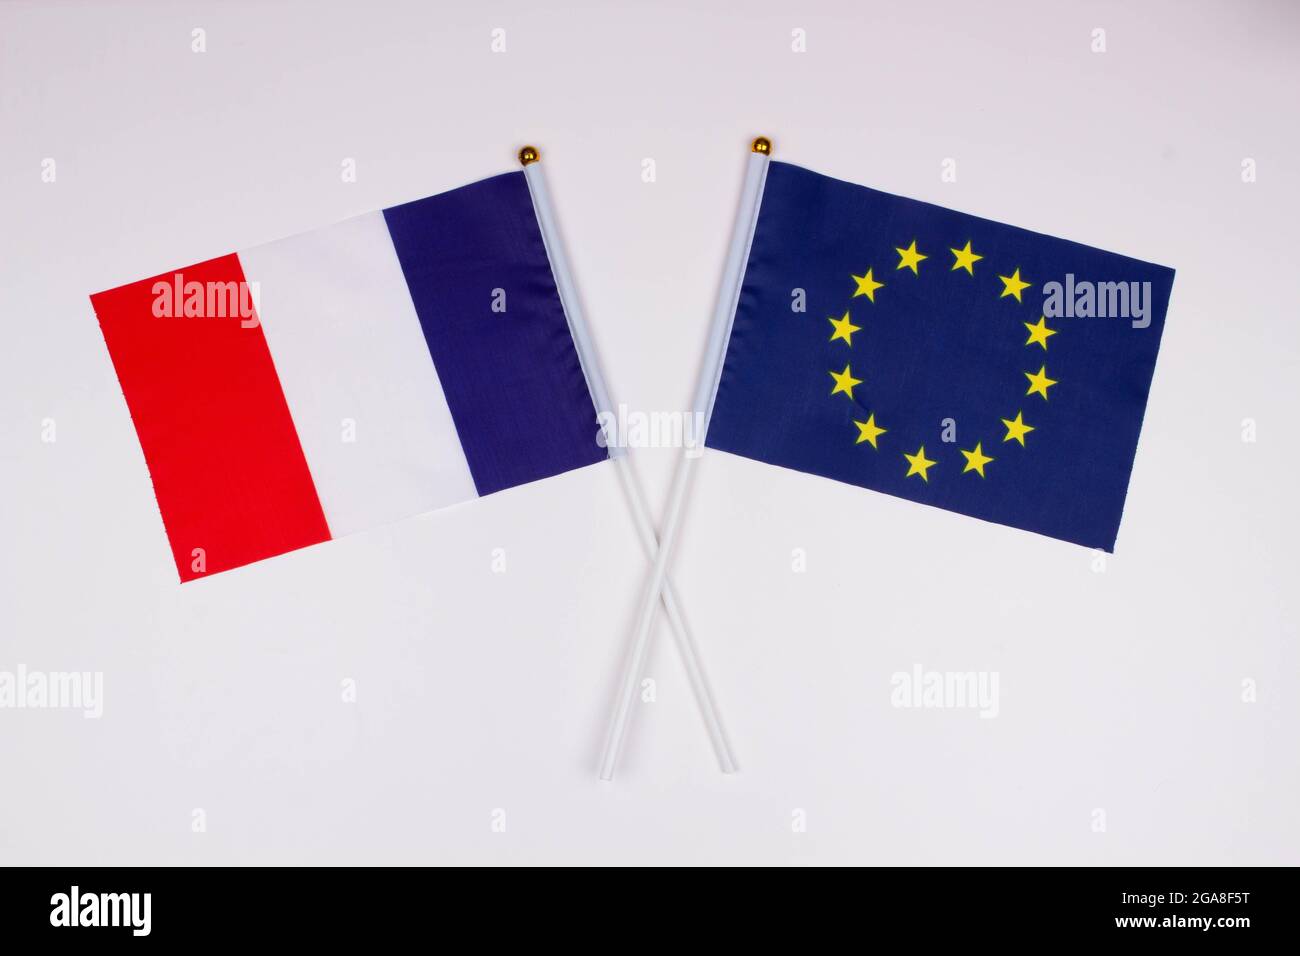 Flag of France and flag of European Union crossed with each other on a white background. Isolated. The image illustrates the relationship between coun Stock Photo